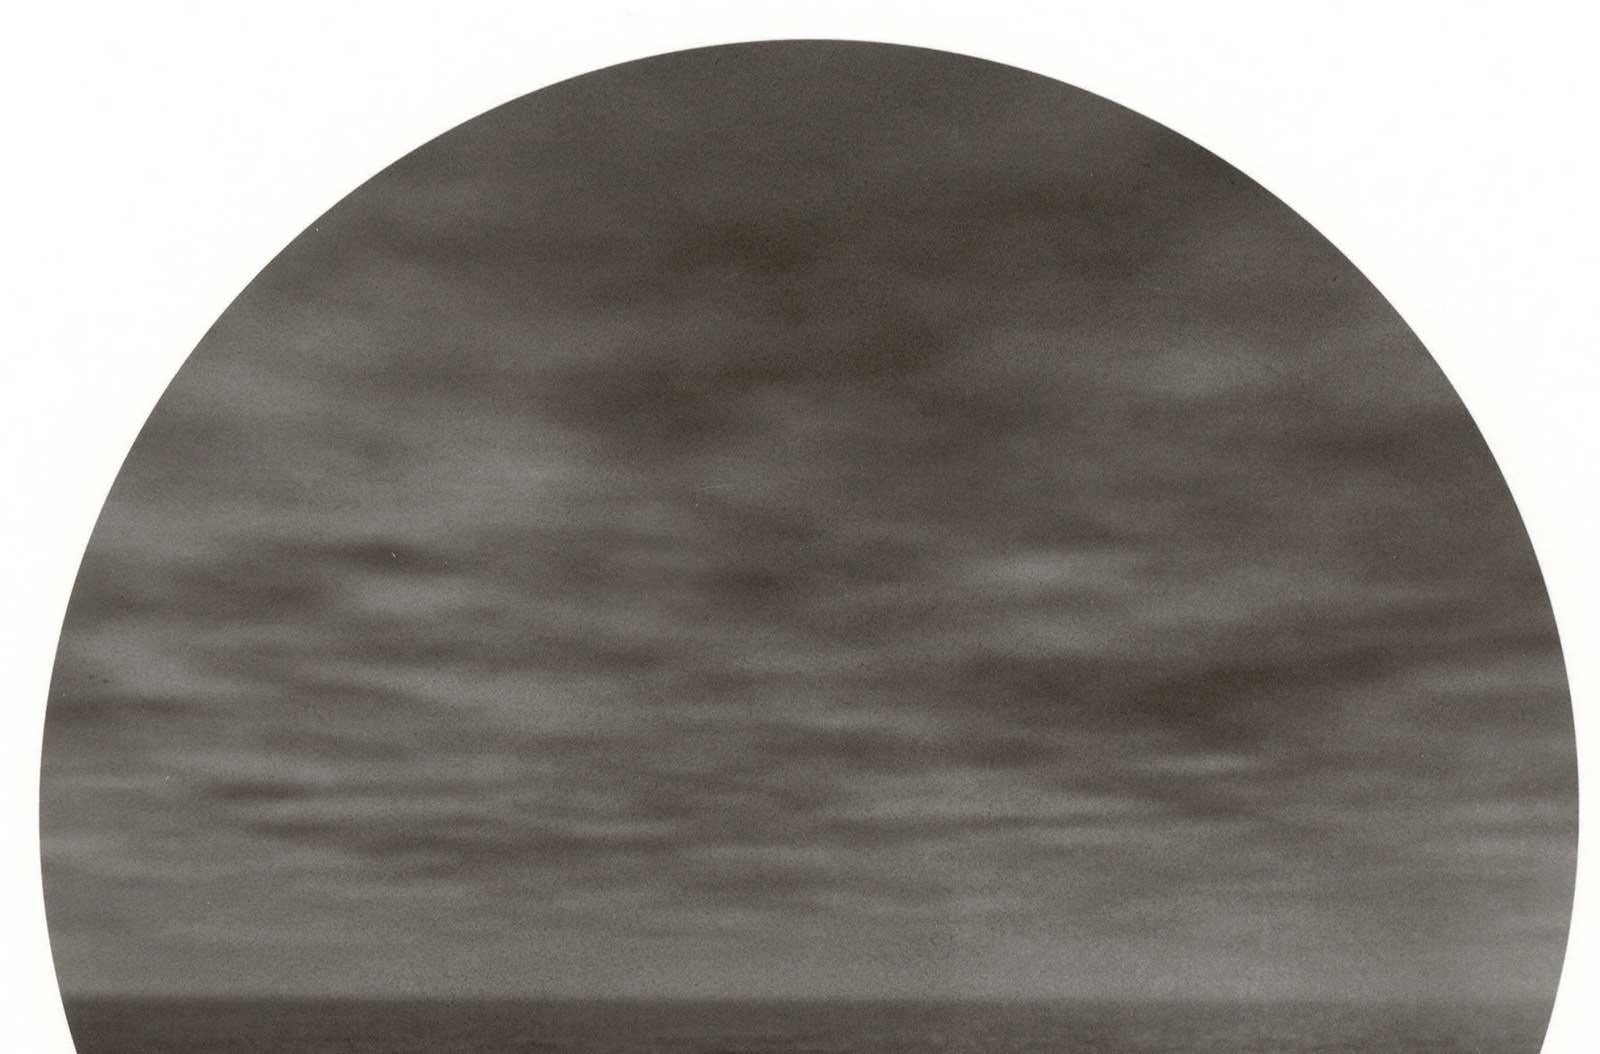 Nocturne (low horizon line on round landscape) - Photograph by Ted Kincaid